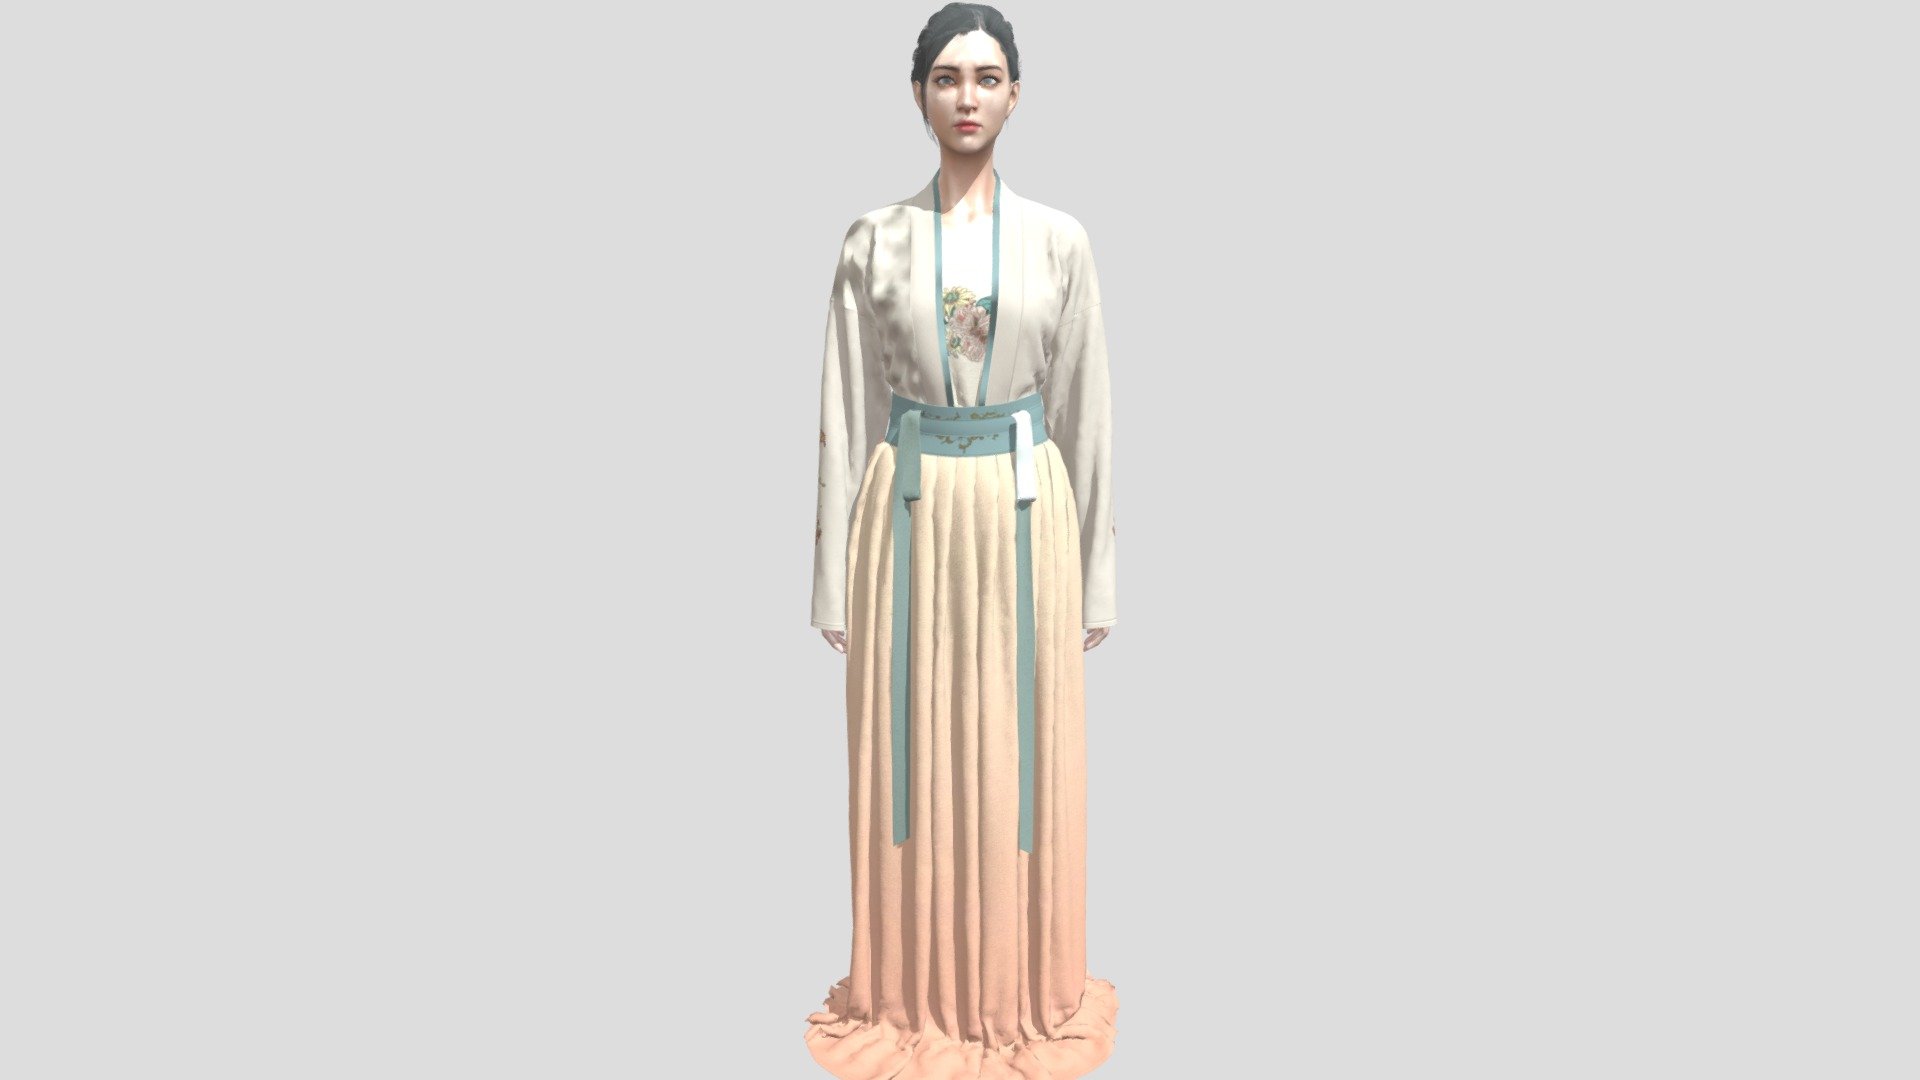 Tang Dynasty yellow jade on the skirt waist hundred fold skirt唐代黄玉色对襟齐腰百褶襦裙

Style3D Meta SDK is a powerful tool that supports real-time solutions in Unreal Engine, enabling the simulation of complex scenarios involving multi-layer fabrics and large-scale actions for realistic clothing animation in the CG industry (such as film, animation, and digital humans). 

To experience plugin,follow next steps,

1.Download Address: https://www.xstyle3d.com/en

2.Operating guide: https://meiguoshiyous-organization.gitbook.io/untitled/quick-start

3.Tutorials: https://youtu.be/YlSMBhtri0E

4.Account Expired Application: https://jinshuju.net/f/pVi2rl (an email reply after the Application)

For more technical discussions,

Discord group: https://discord.gg/btczd6NnS7 - Tang Dynasty yellow jade waist hundredfold skirt - Download Free 3D model by Style3D CG (@Style3DMeta) 3d model